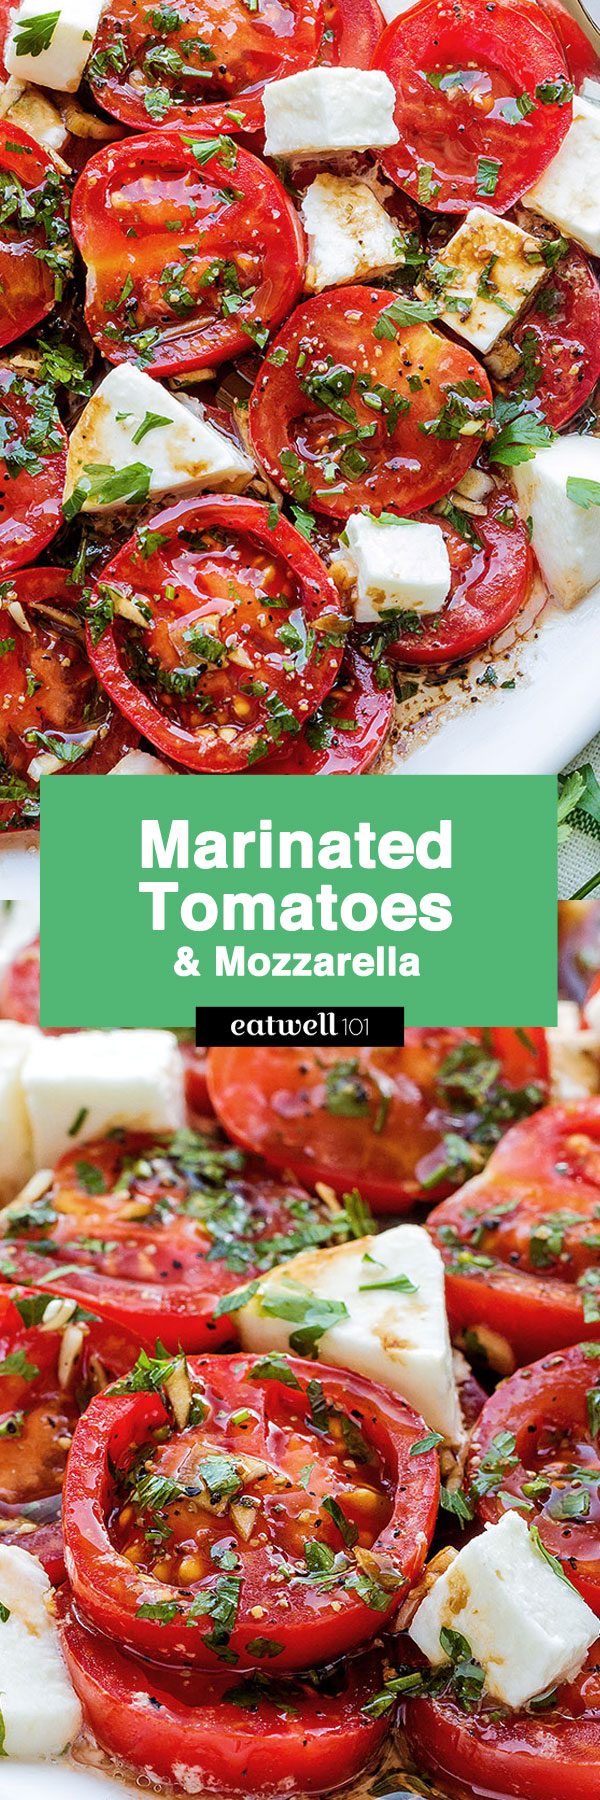 Marinated Tomatoes recipe – #tomato #recipe #eatwell101  - A perfect hors d’oeuvre full of fresh summer flavors!